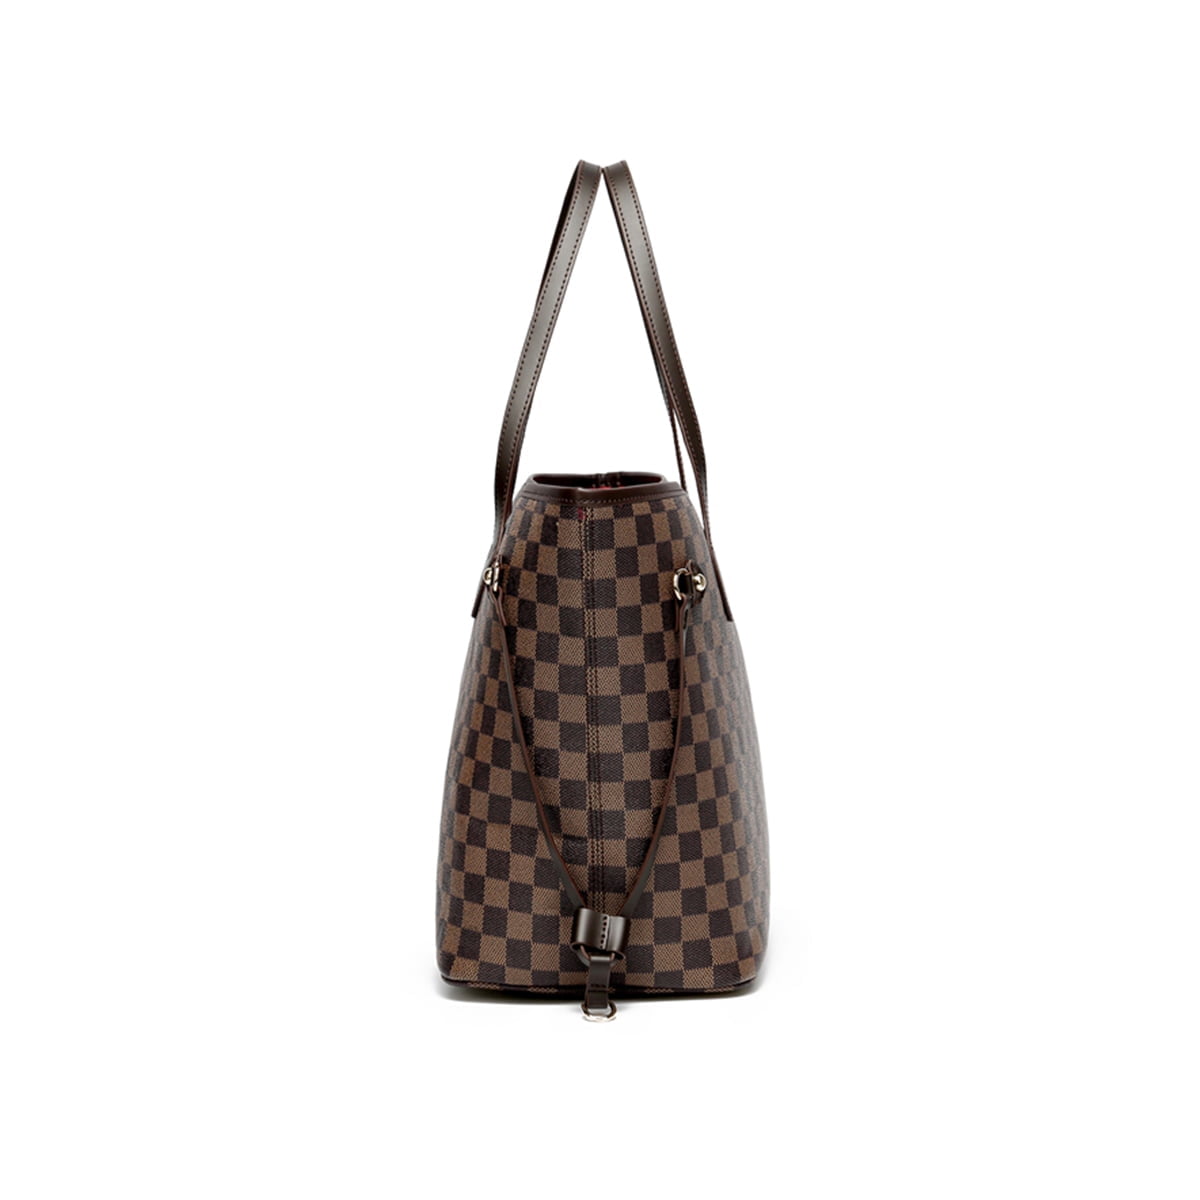 MK Gdledy Women Handbags Checkered Tote Shoulder Bag with inner